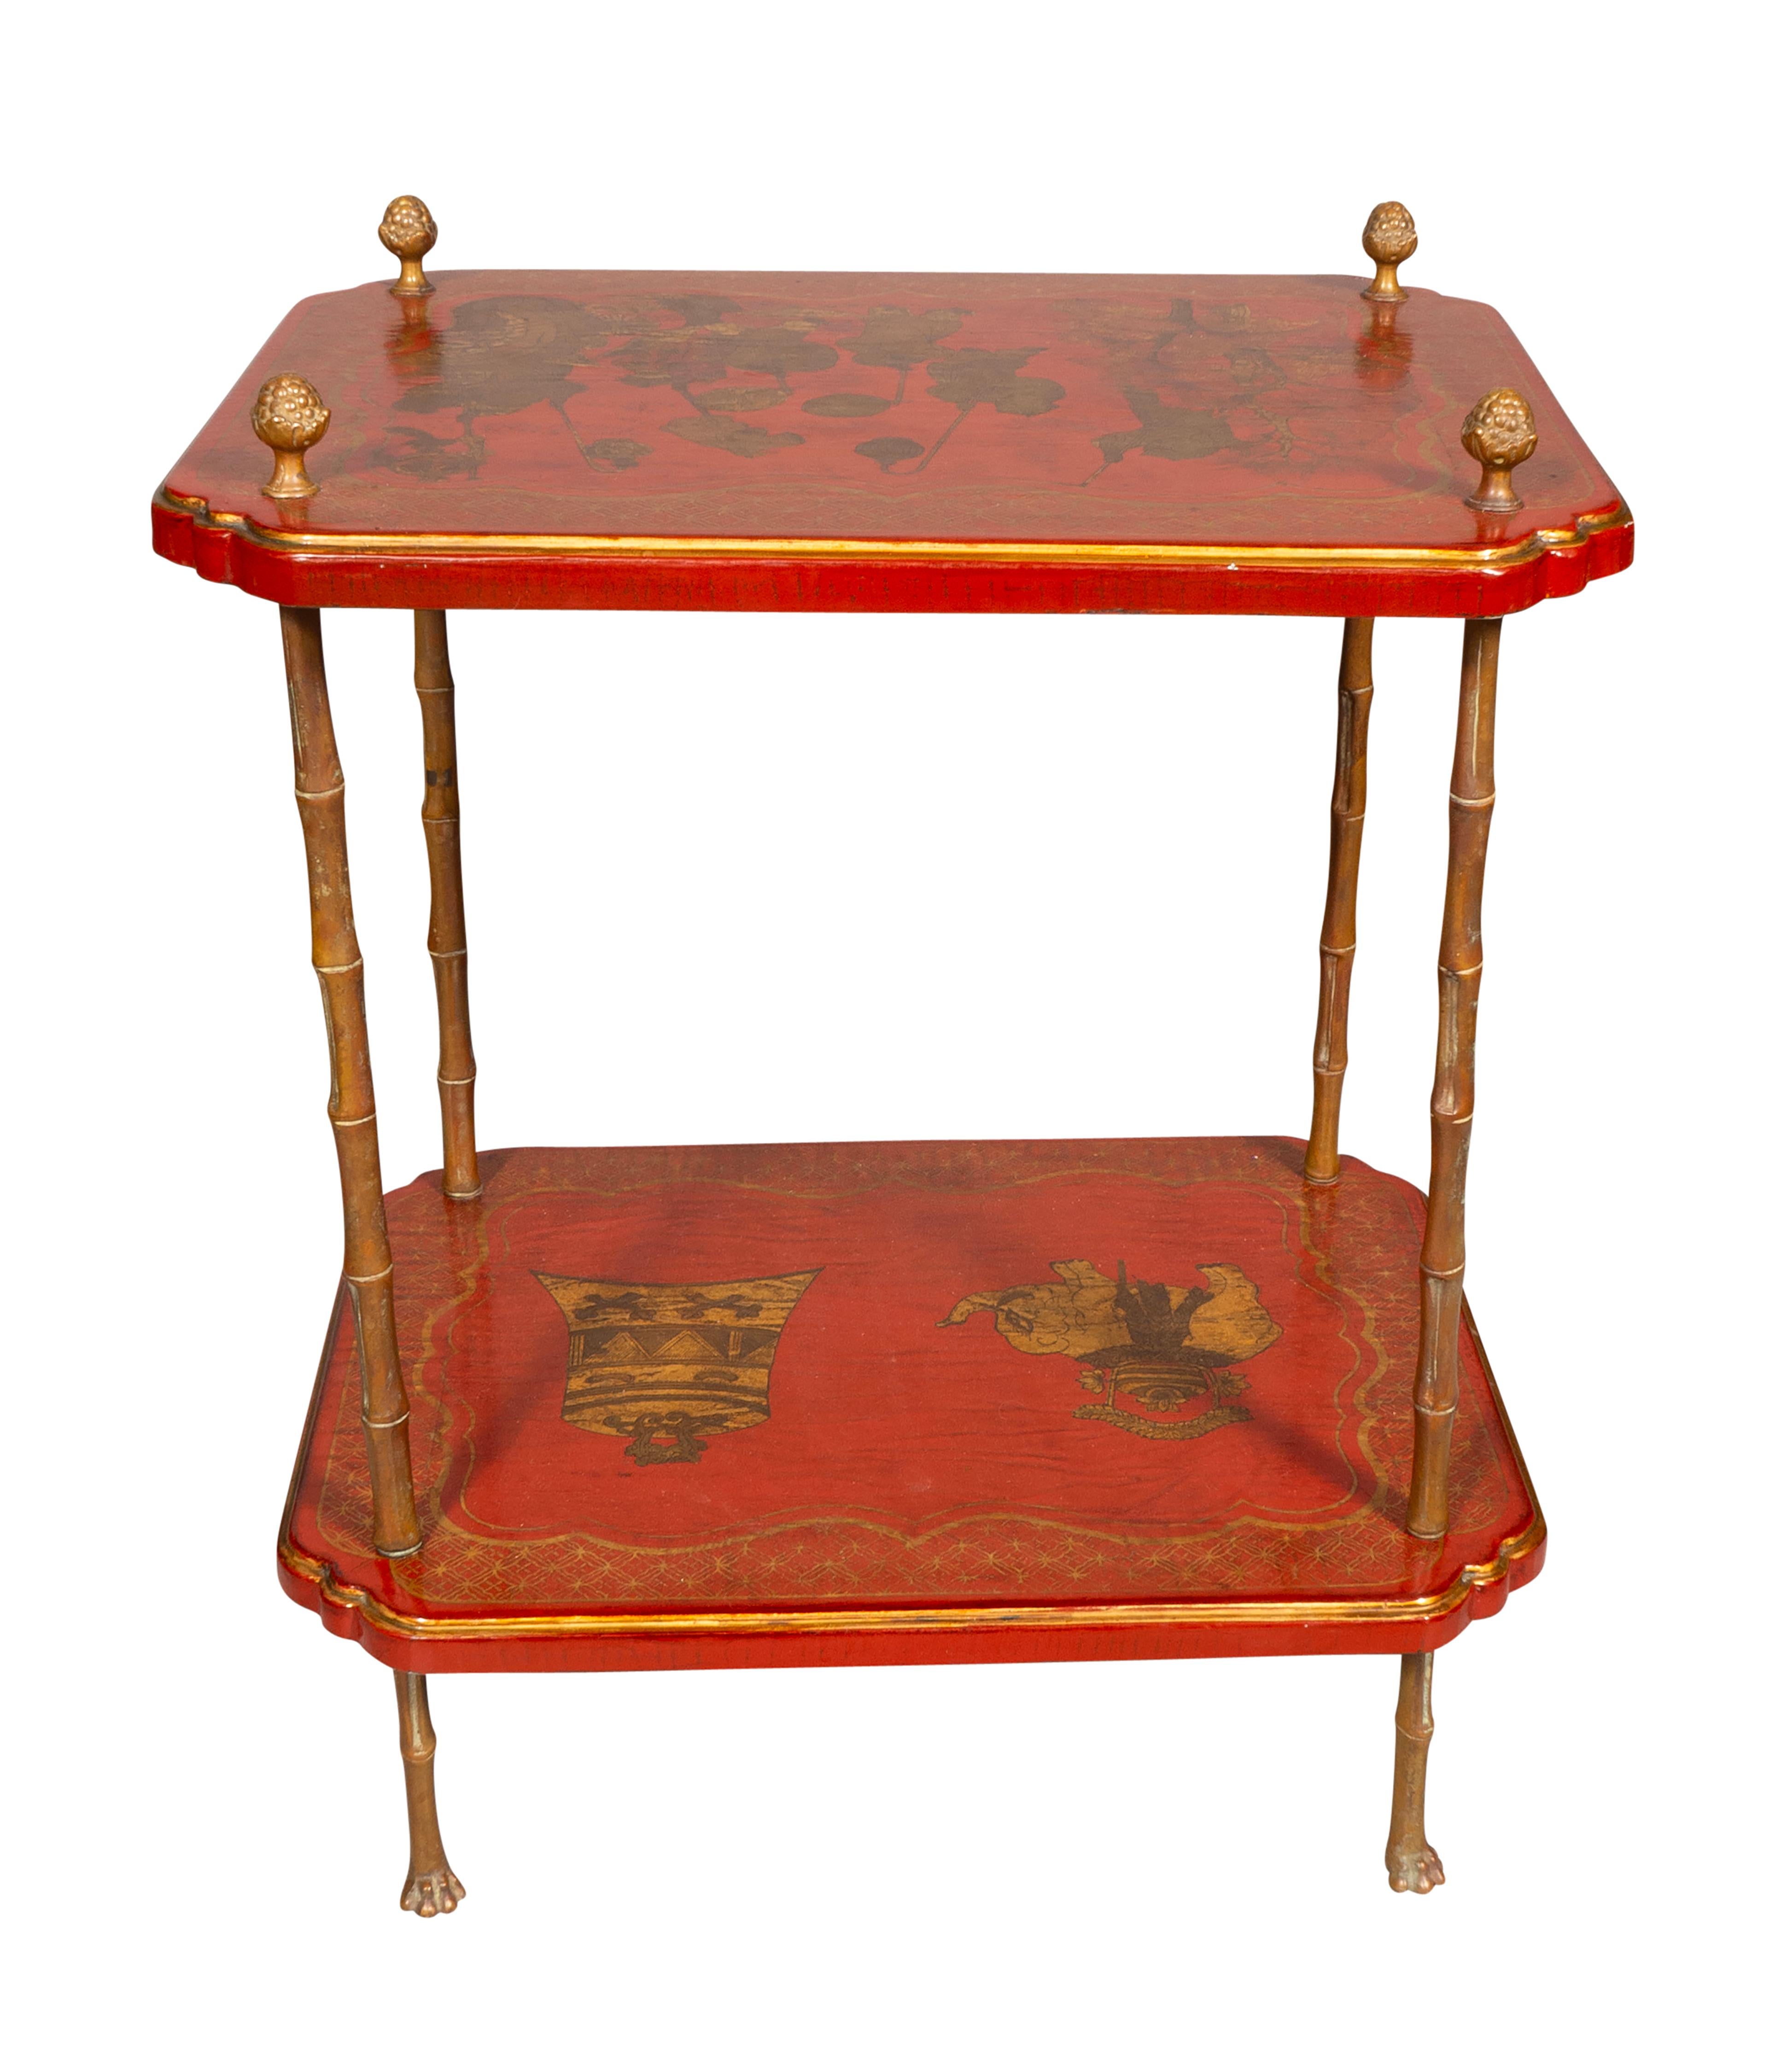 Red japanned and gilt details with two tiers and with brass shelf dividers and legs.